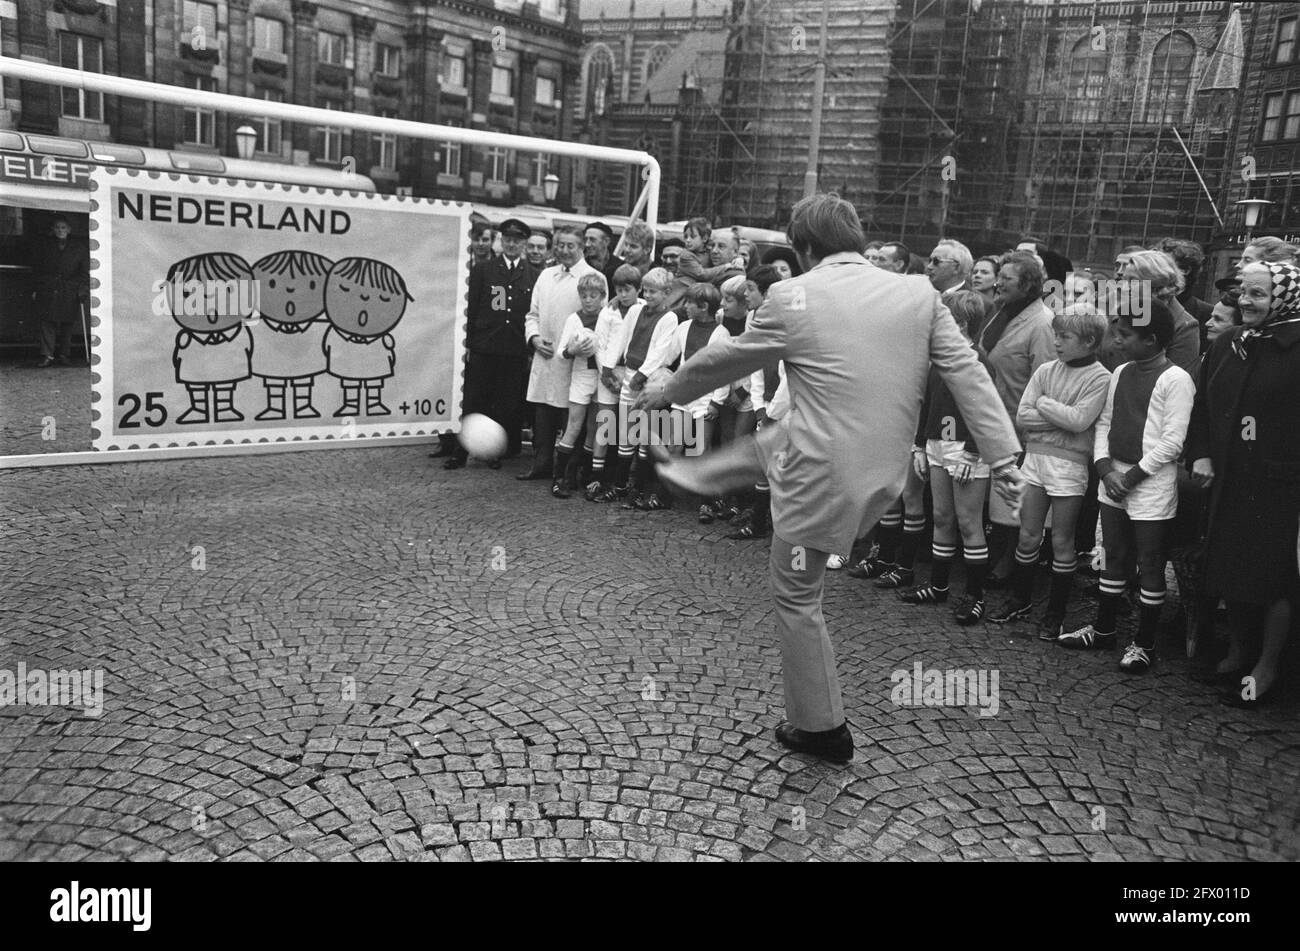 Ruud Krol, Ajax footballer, starts children's stamp campaign on Dam Square Amsterdam. Ruud Krol shoots, November 11, 1969, ACTIONS, CHILDREN'S POSTAGE STAMPS, The Netherlands, 20th century press agency photo, news to remember, documentary, historic photography 1945-1990, visual stories, human history of the Twentieth Century, capturing moments in time Stock Photo